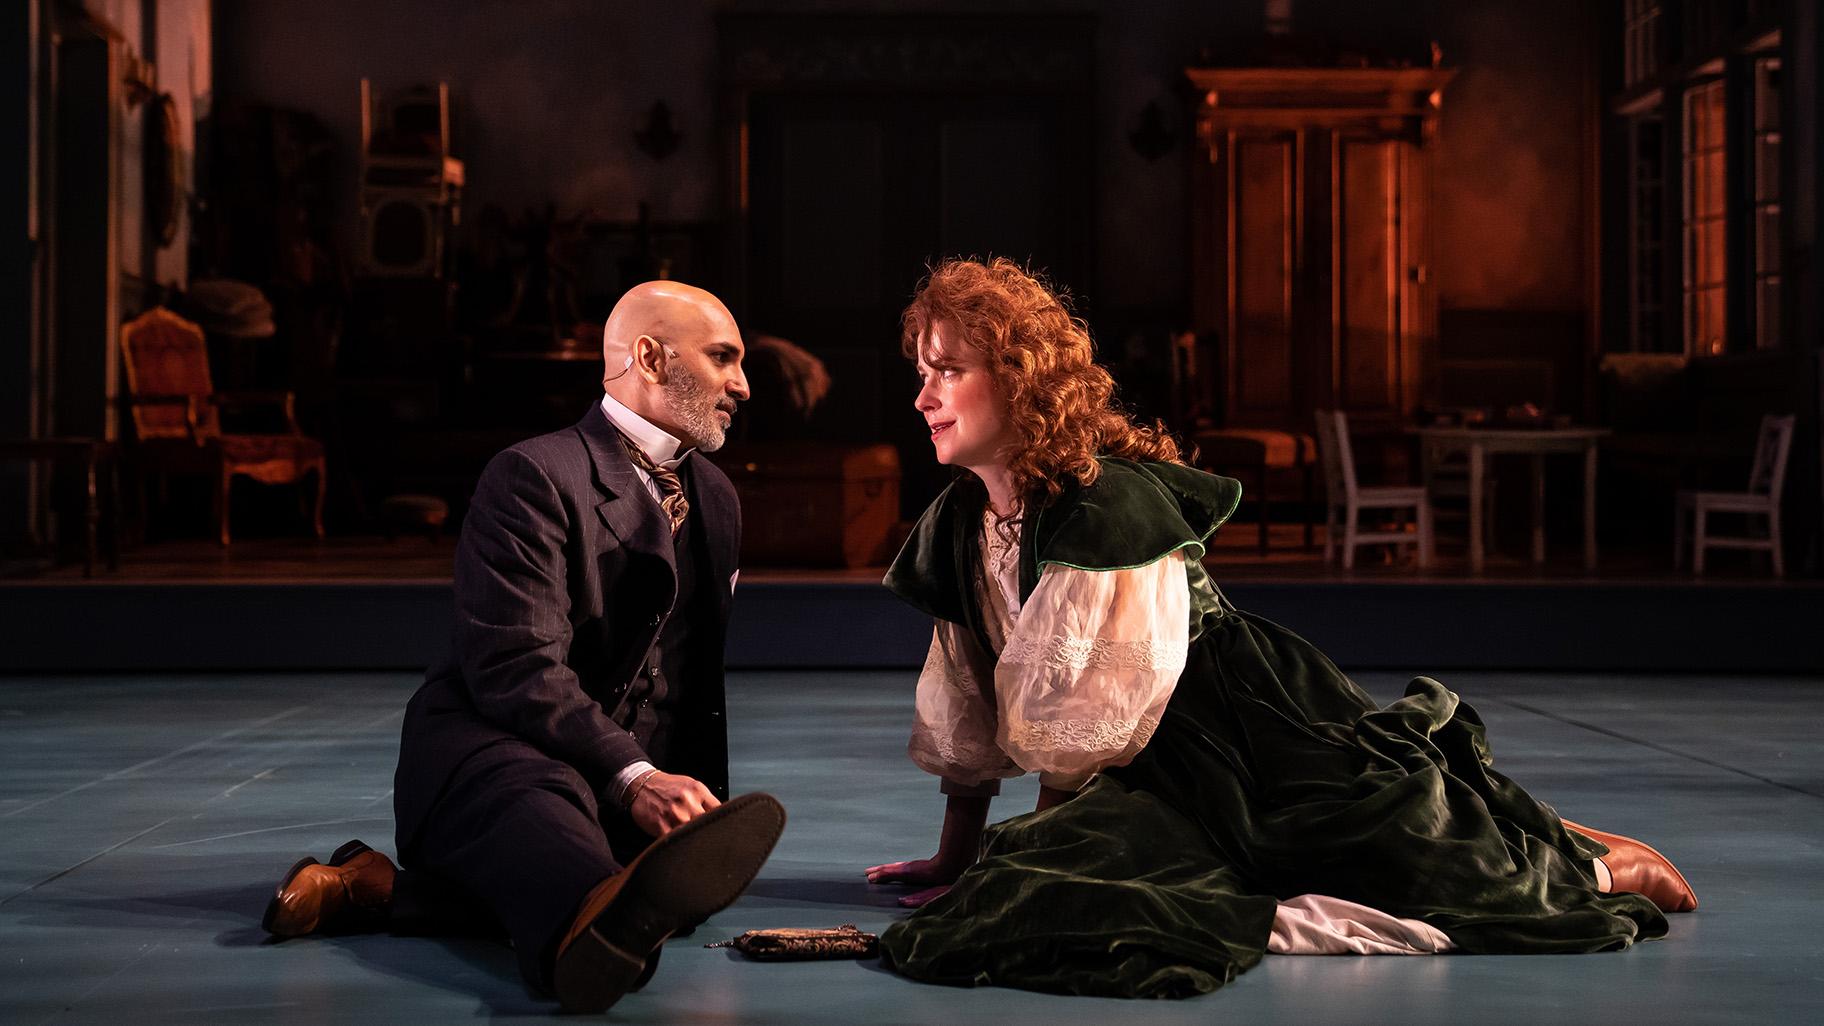 Kareem Bandealy and Kate Fry in in Anton Chekhov’s “The Cherry Orchard” at Goodman Theatre. (Credit: Liz Lauren)